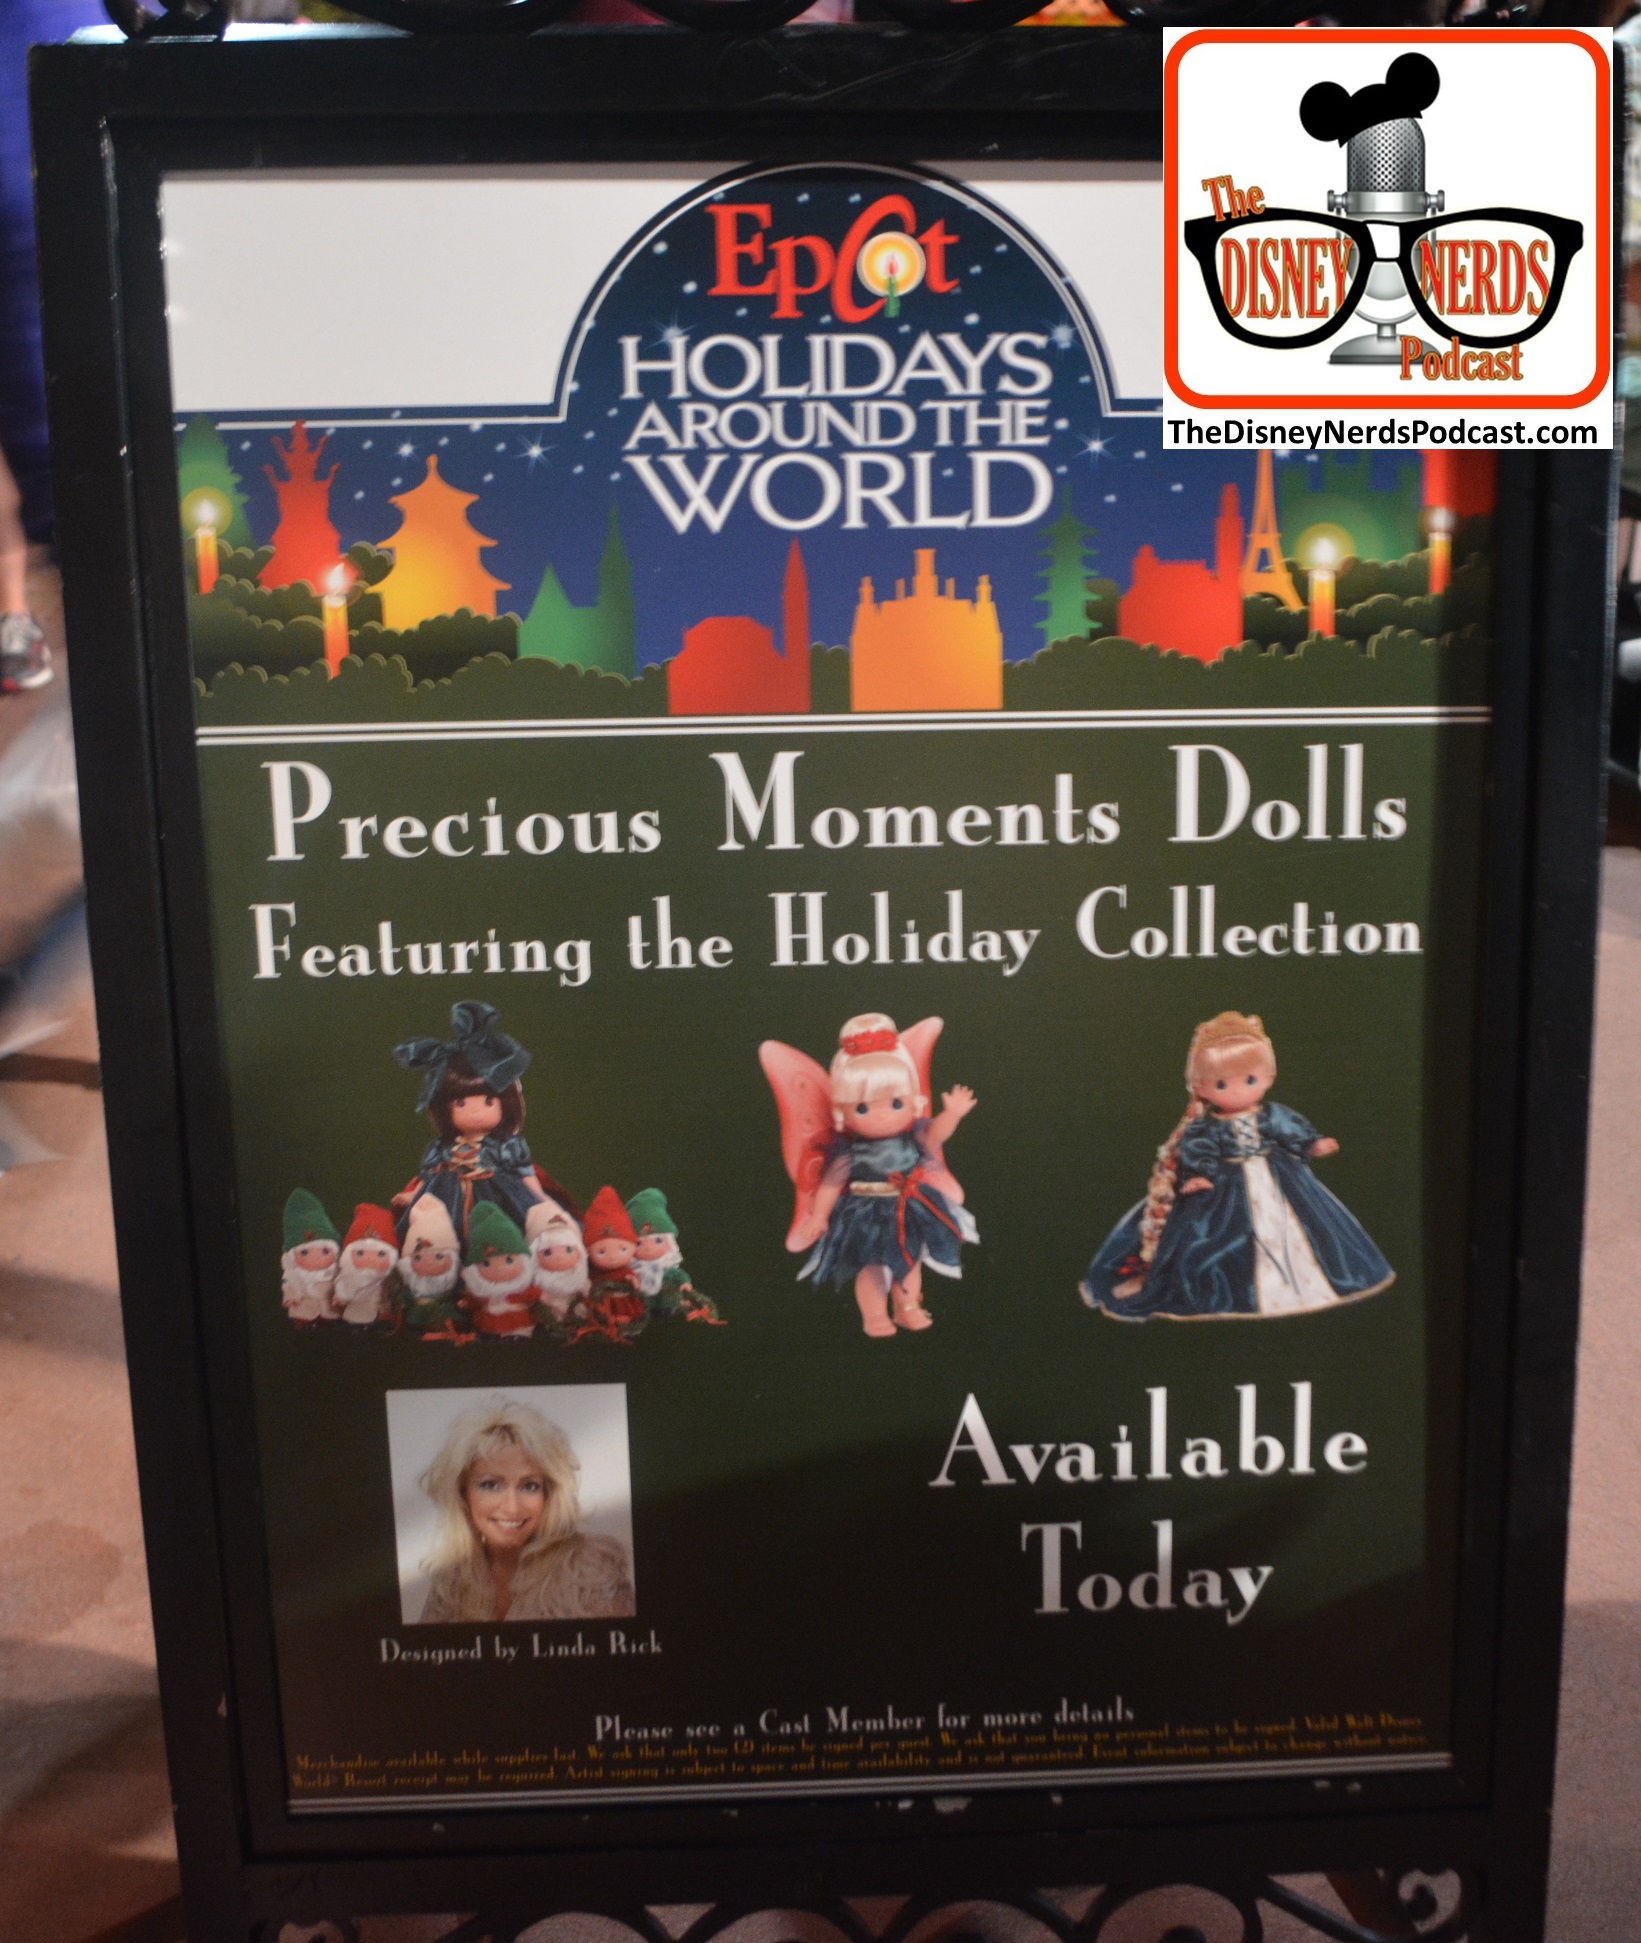 2015-12 - Epcot - Holidays Around the World Featured many unique shopping opportunities